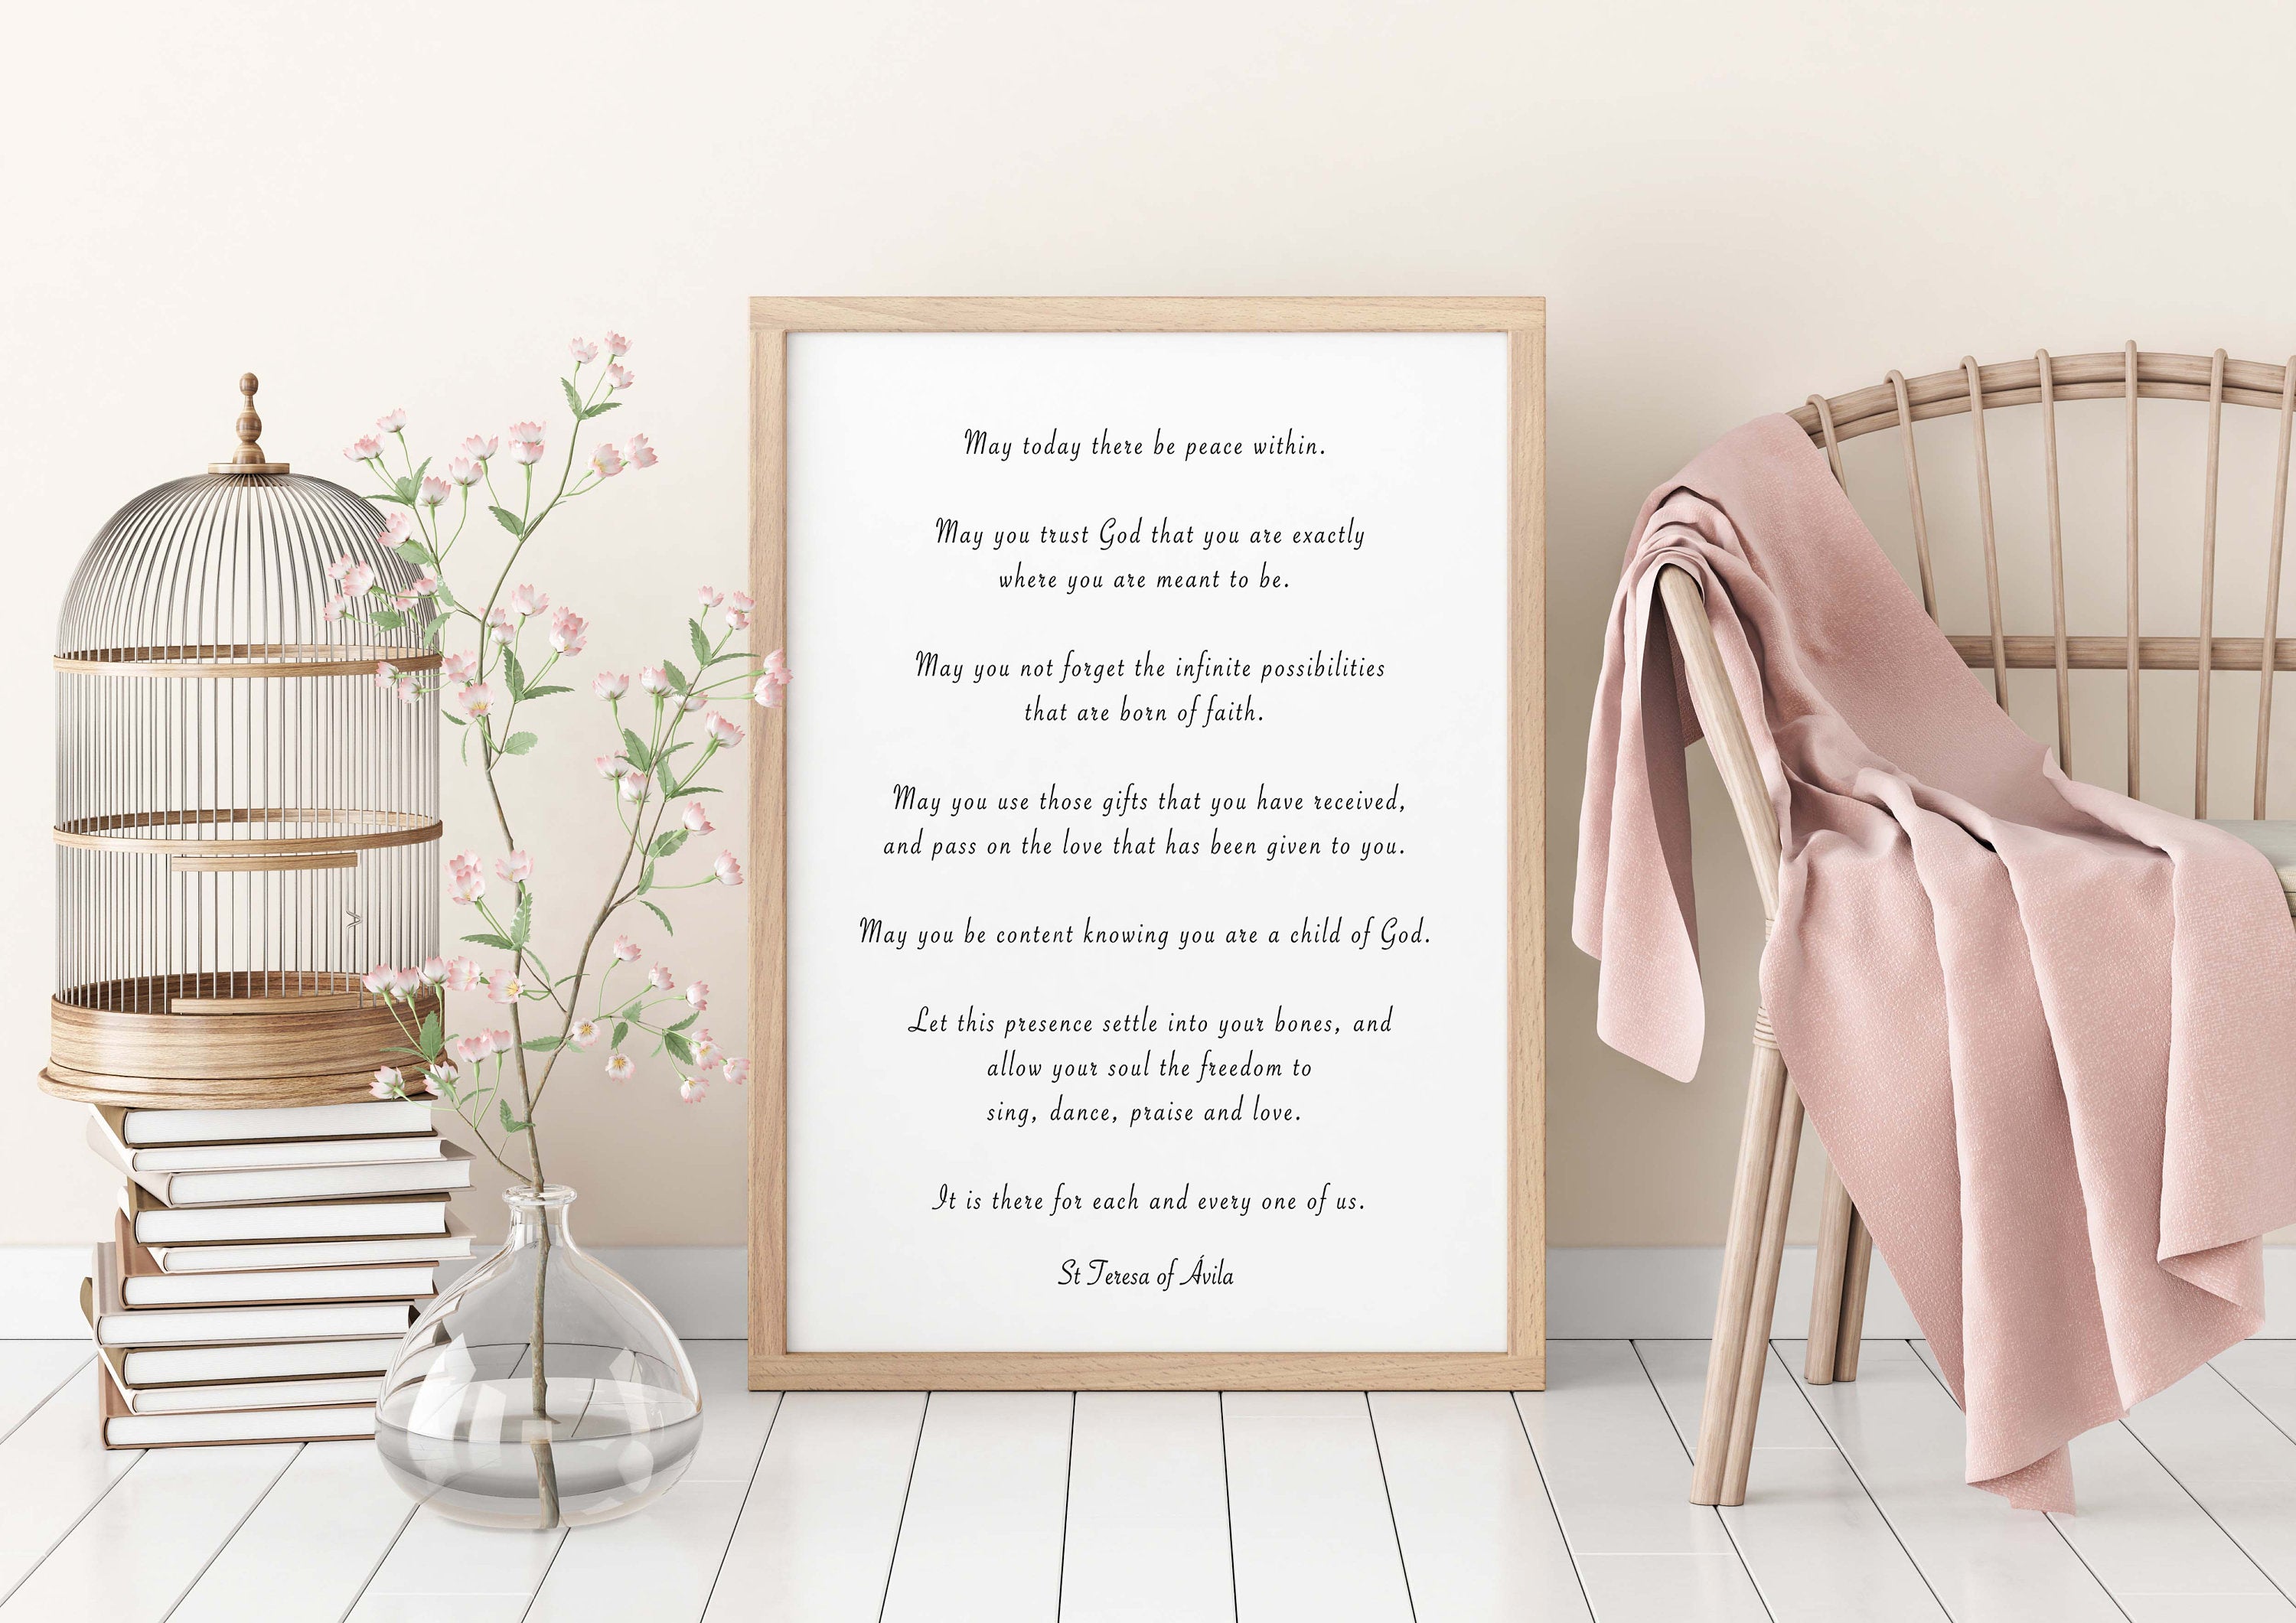 St. Teresa Of Avila Peace Quote Print in Black & White, May Today There Be Peace Within Inspirational Quote Wall Art Print